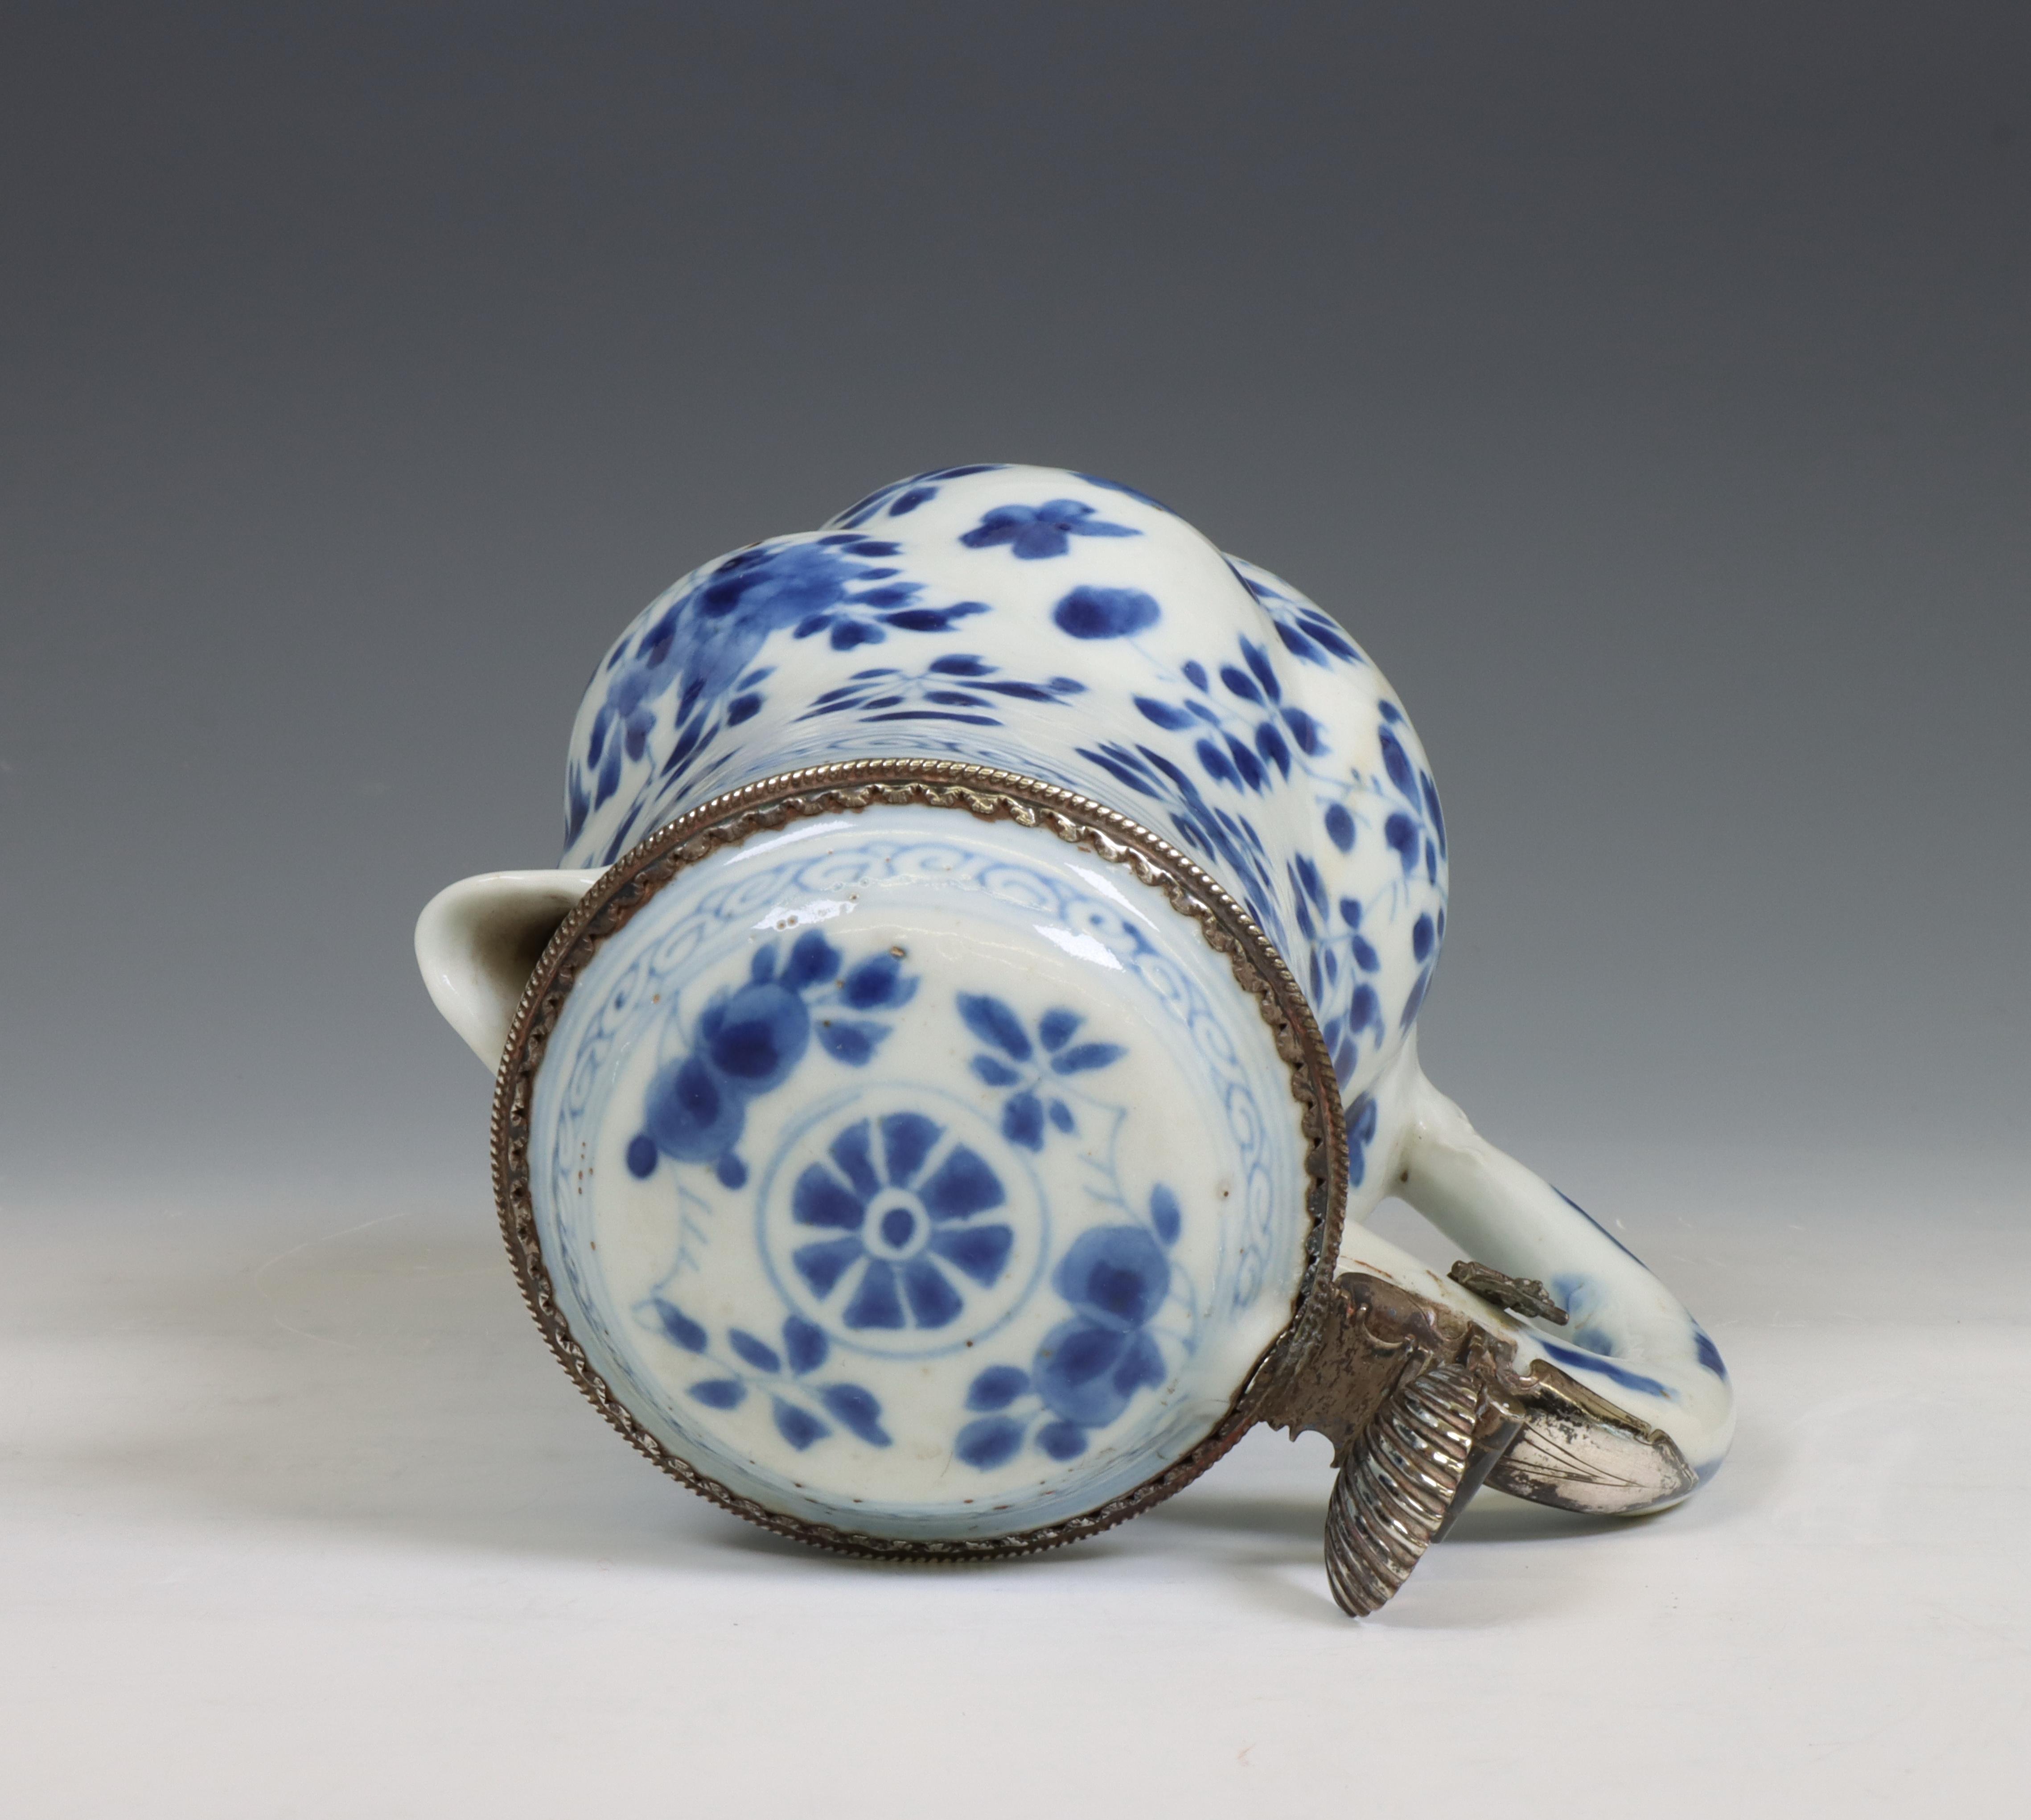 China, a blue and white porcelain gadrooned ewer and silver-mounted cover, Kangxi period (1662-1722) - Image 4 of 6